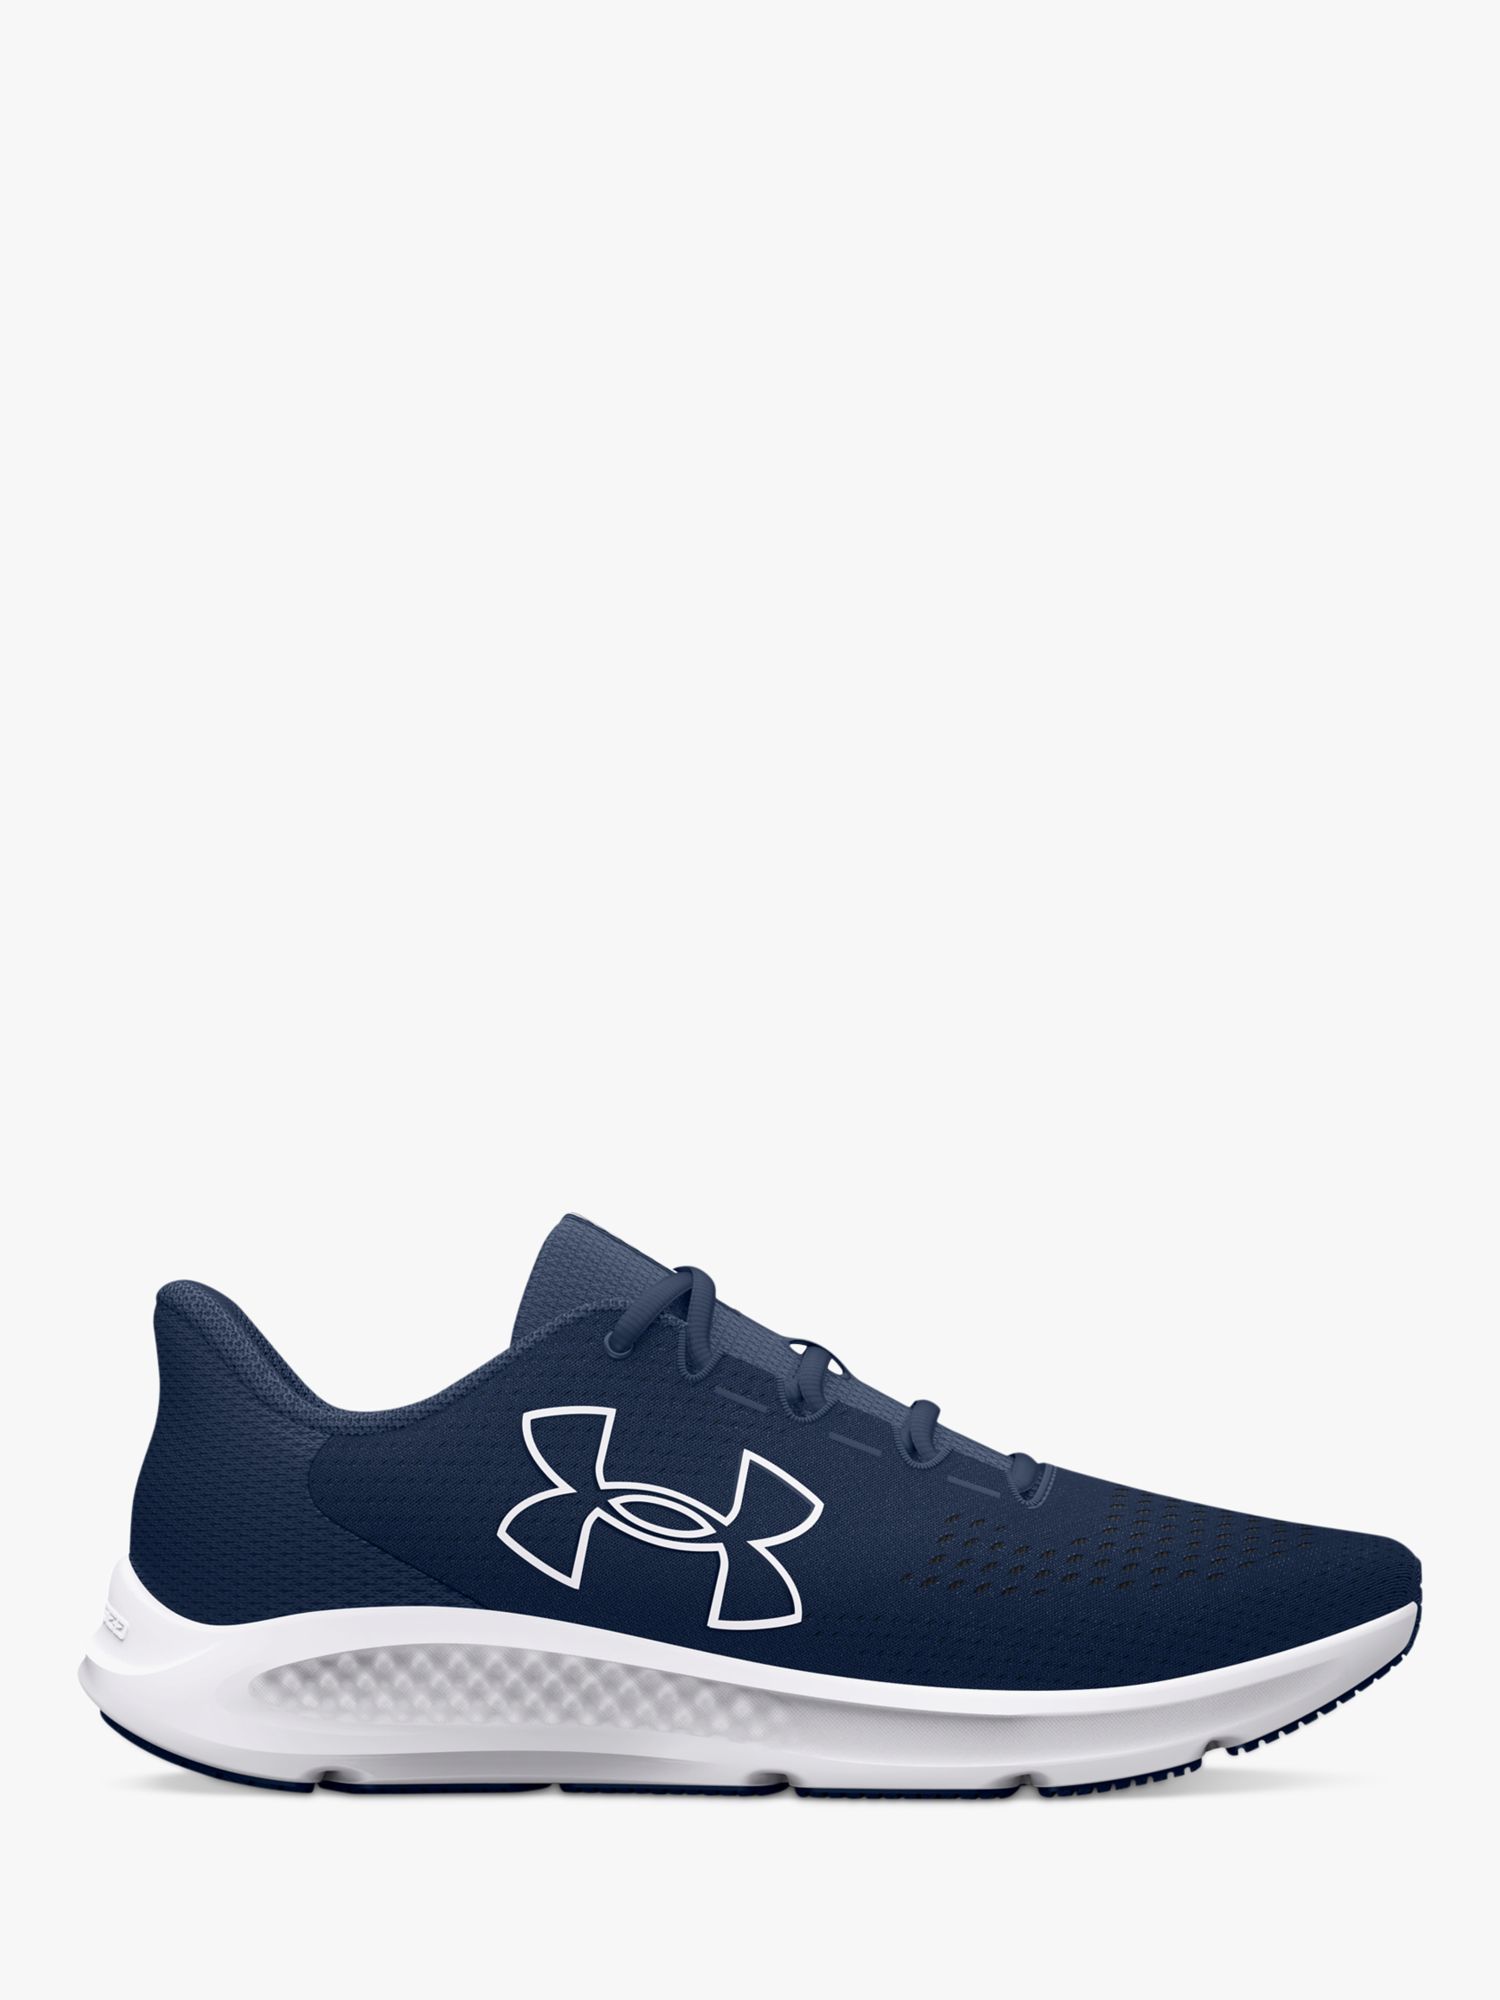 Under Armour Charged Pursuit 3 Big Logo Men's Running Shoes, Academy/Academy/Wht, 8